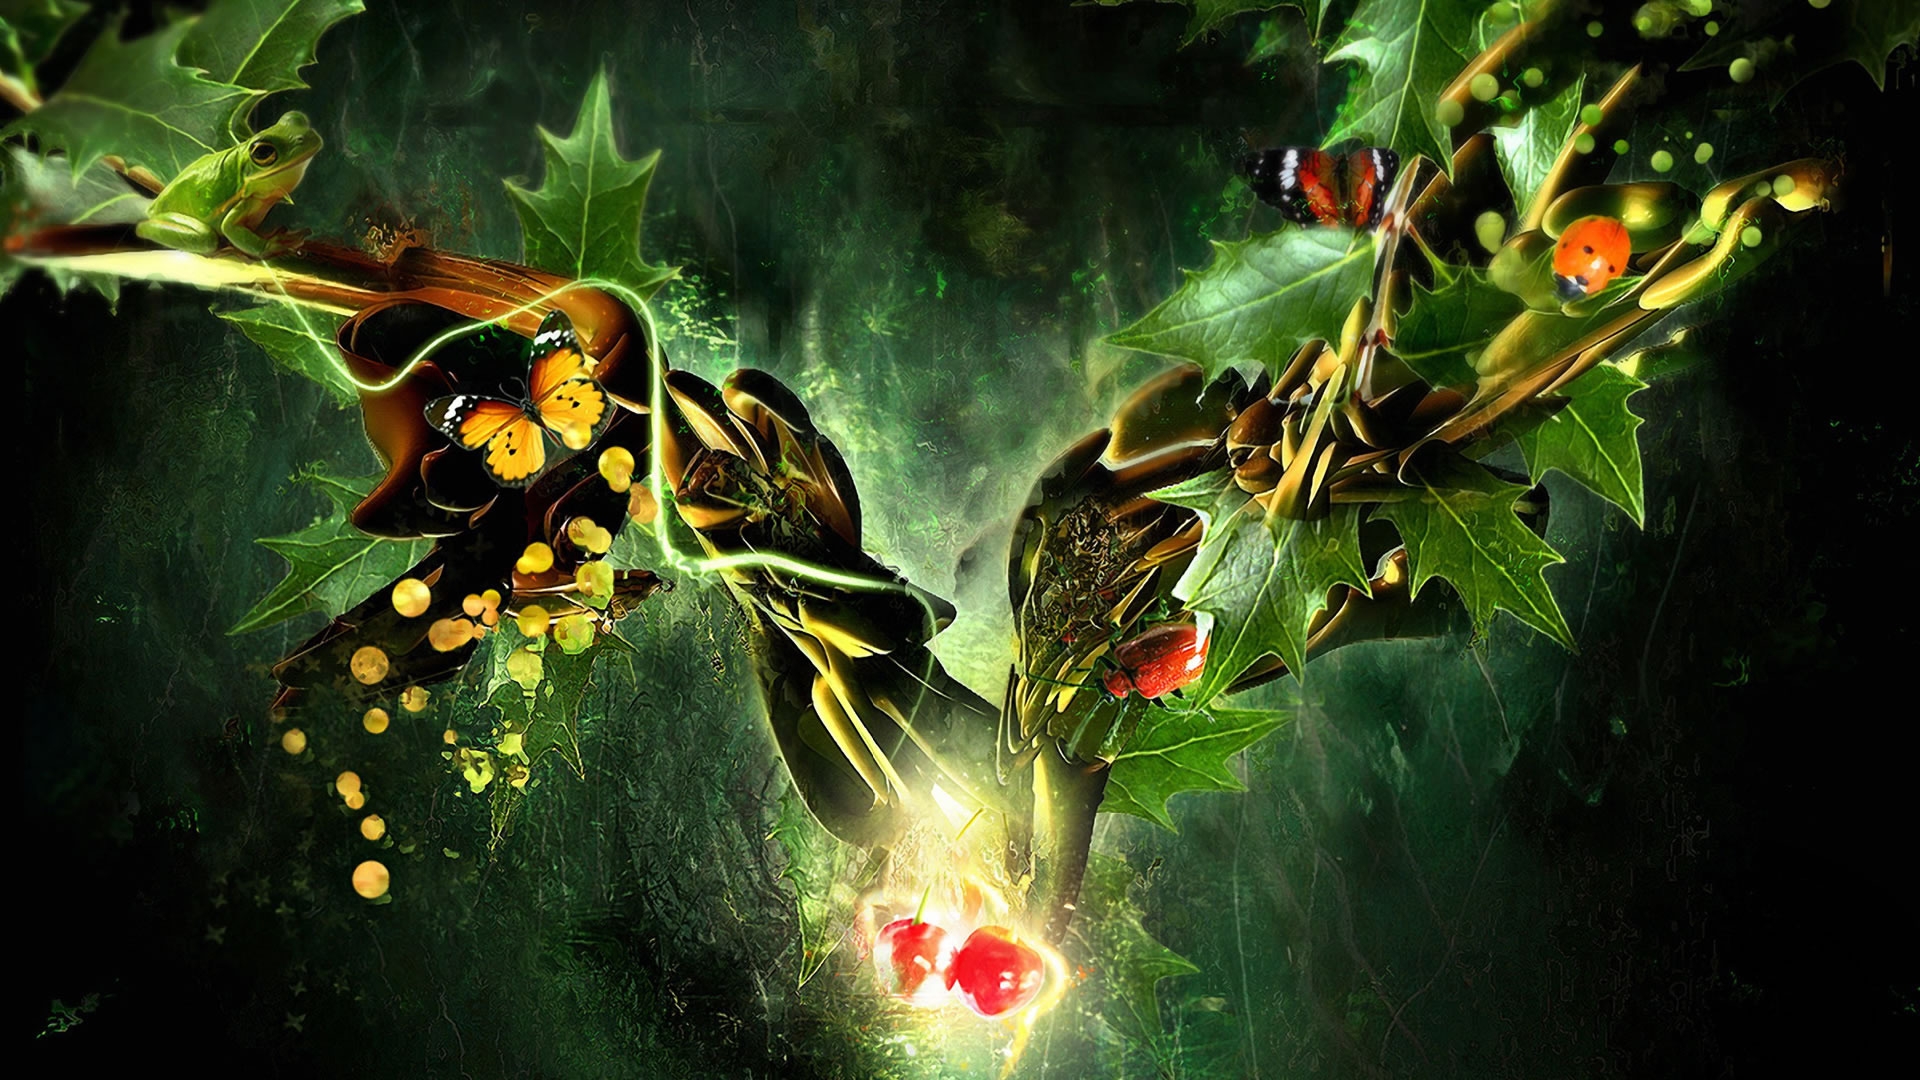 Butterfly, Ladybug, Frog in a Fantasy World for 1920 x 1080 HDTV 1080p resolution